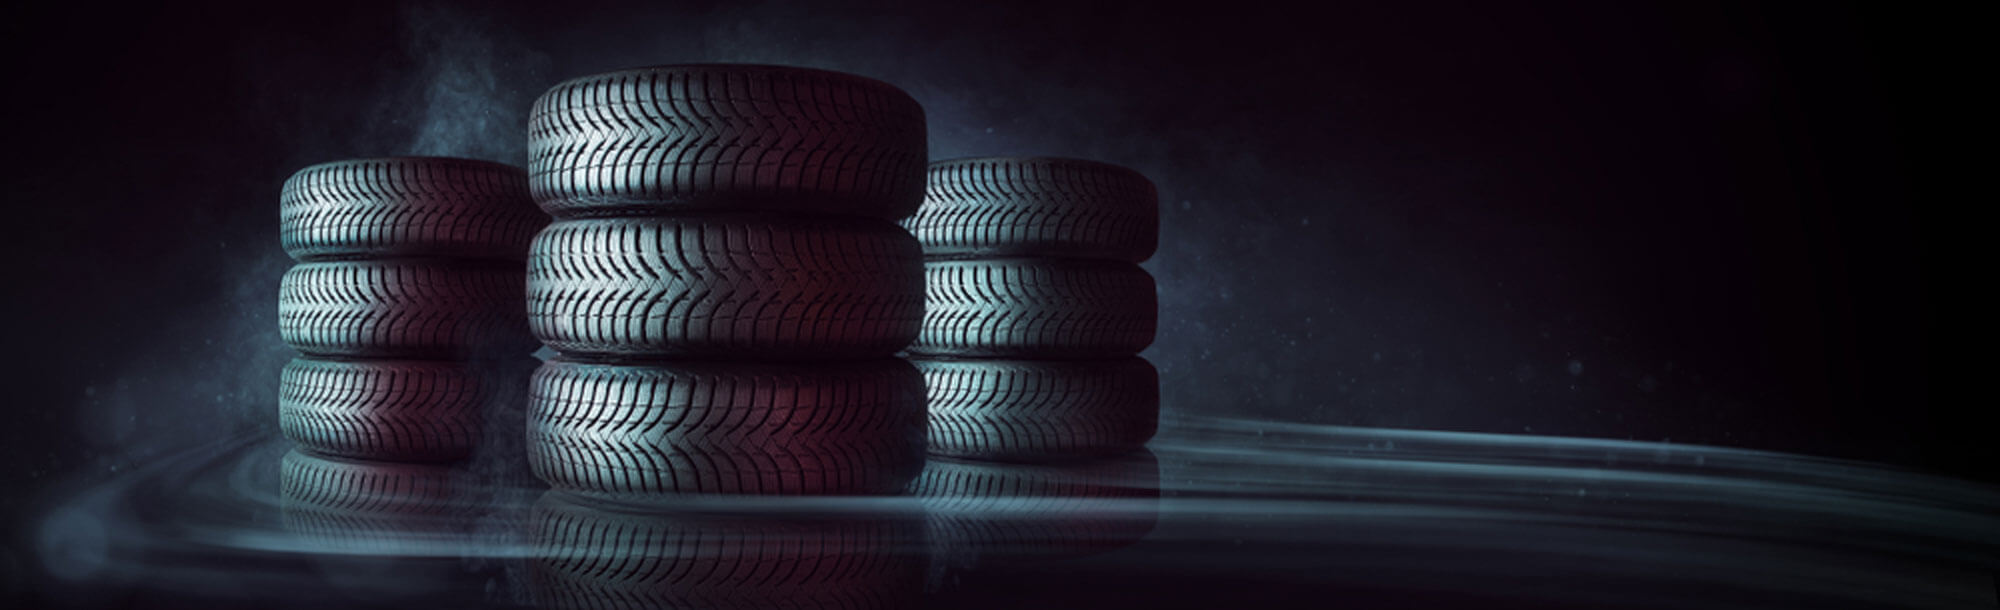 Three stacks of tires against a black background